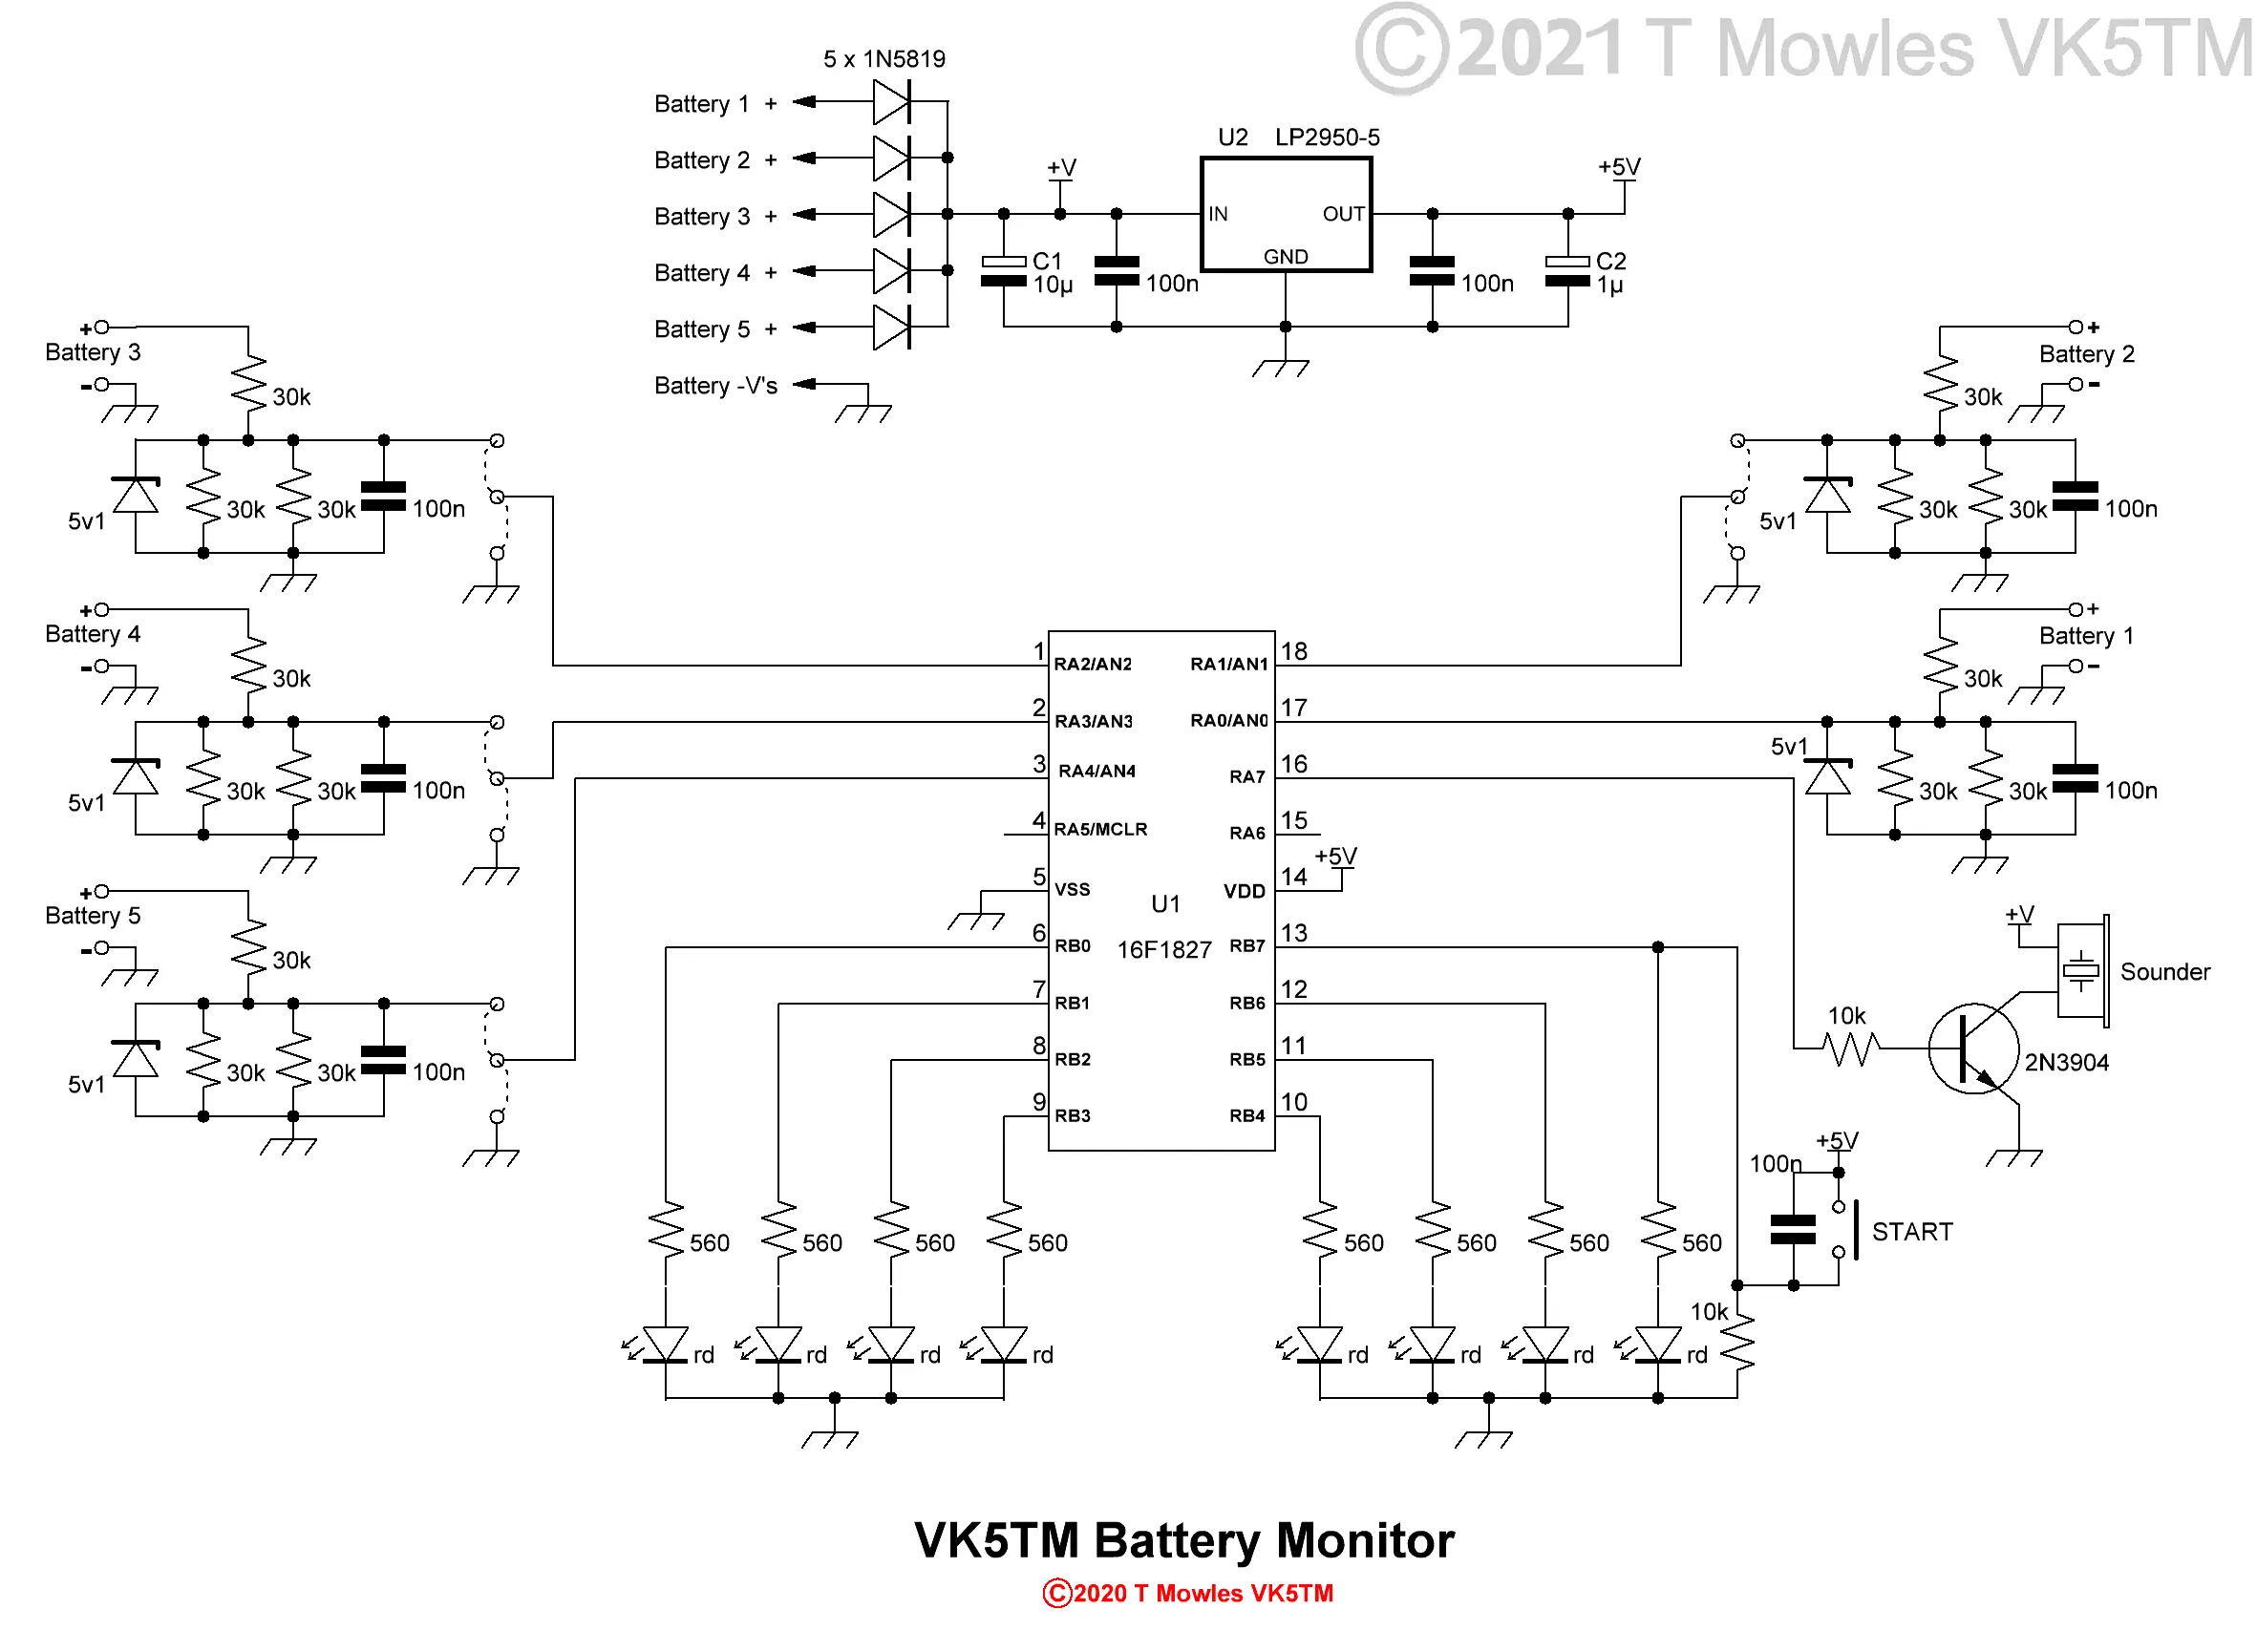 updated battery monitor 16F1827 schematic